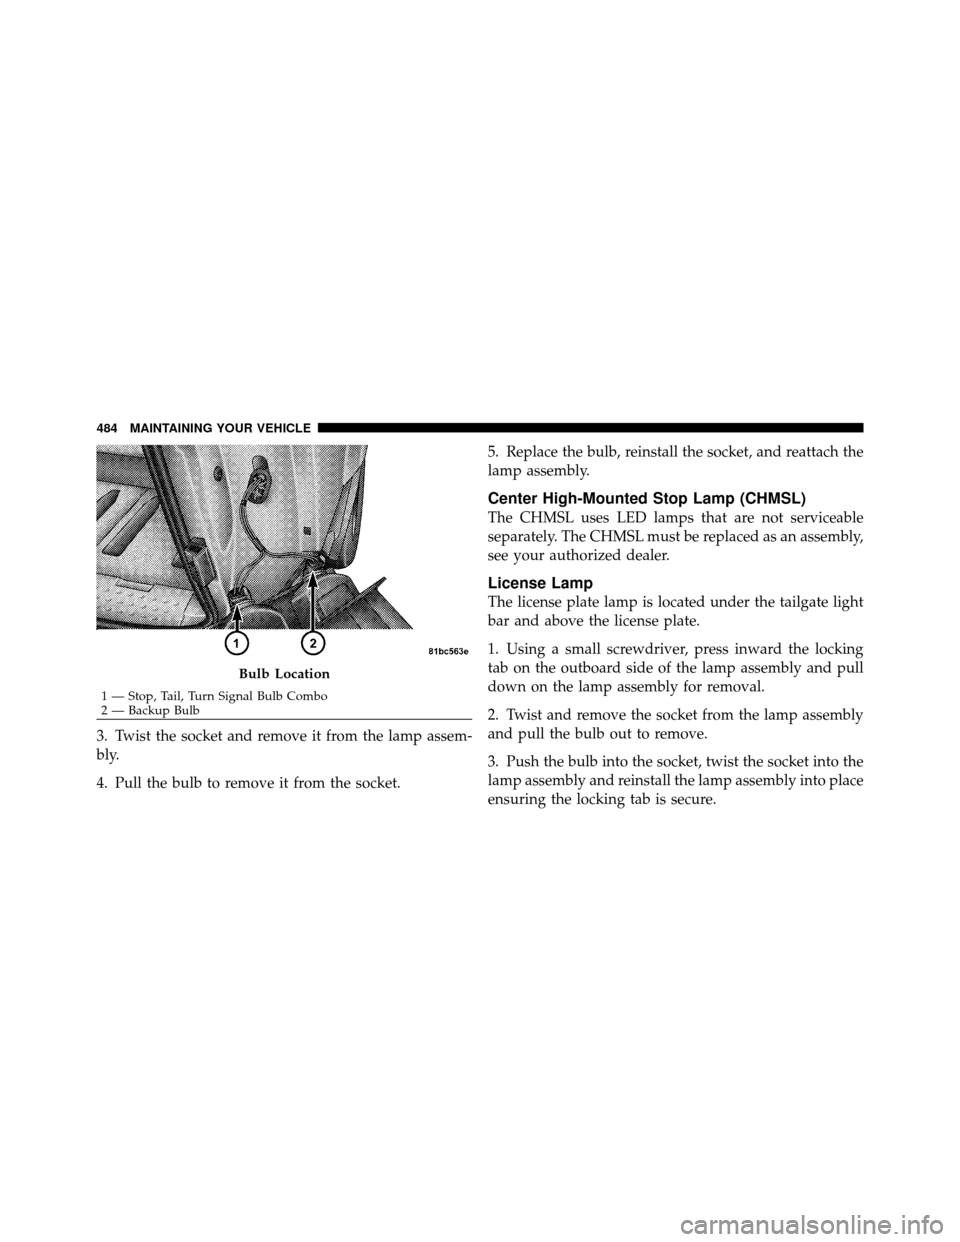 CHRYSLER TOWN AND COUNTRY 2010 5.G Workshop Manual 3. Twist the socket and remove it from the lamp assem-
bly.
4. Pull the bulb to remove it from the socket.5. Replace the bulb, reinstall the socket, and reattach the
lamp assembly.
Center High-Mounted